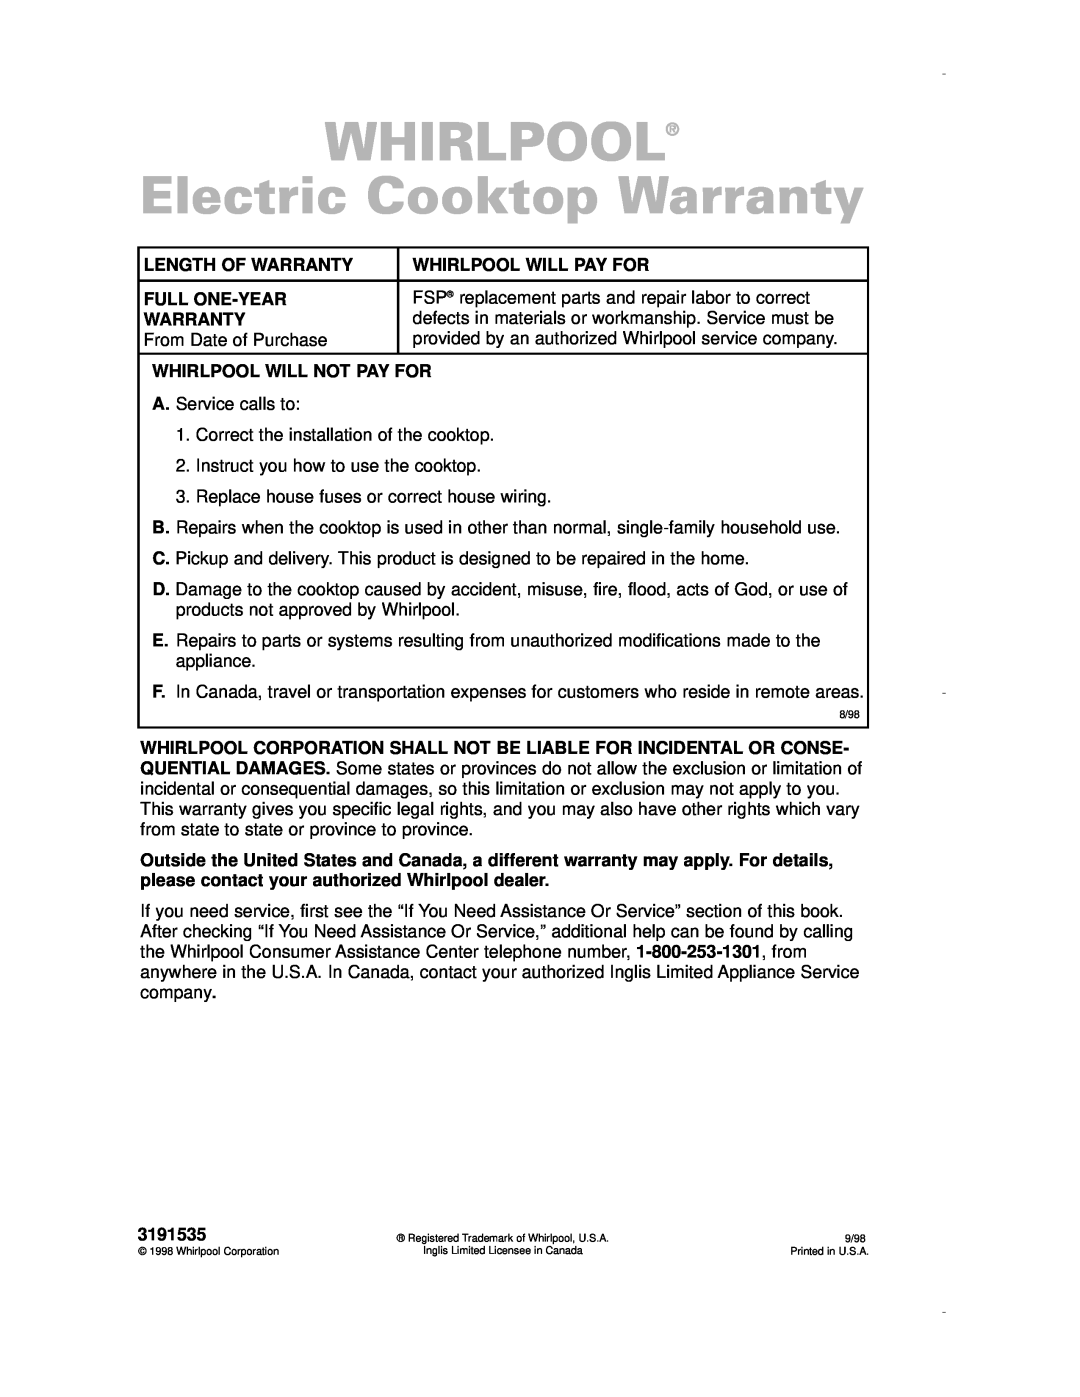 Whirlpool RCS3614G, RCS2012G, RCS2002G, RCS3014G, RCS3004G important safety instructions Whirlpool, Electric Cooktop Warranty 